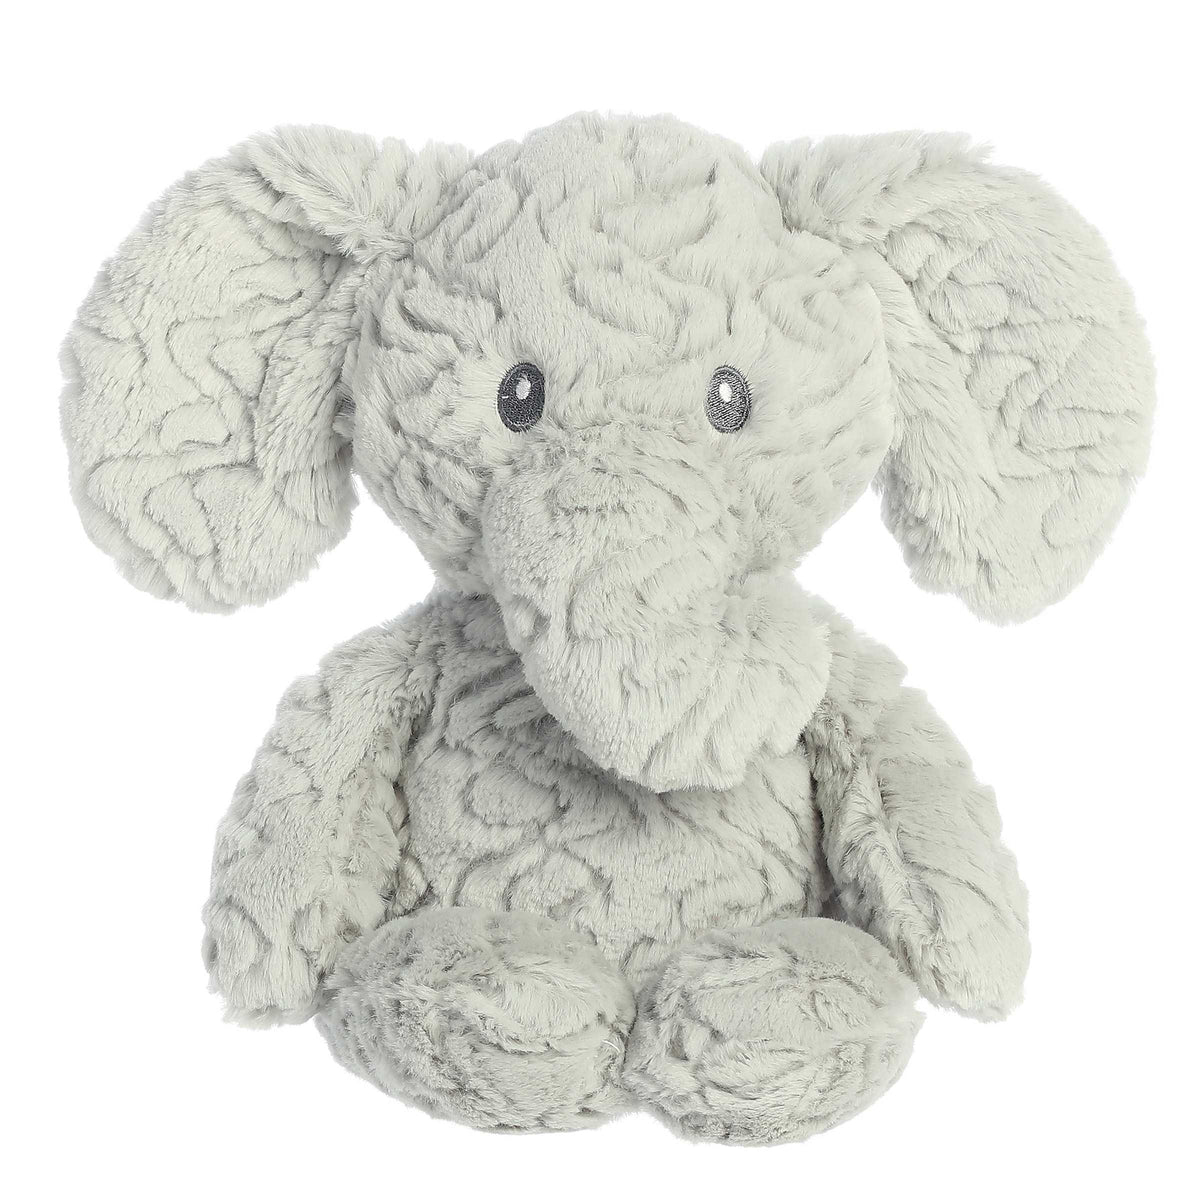 Soft grey elephant plush with friendly blue eyes and textured fabric, crafted for tactile exploration, by Aurora plush.